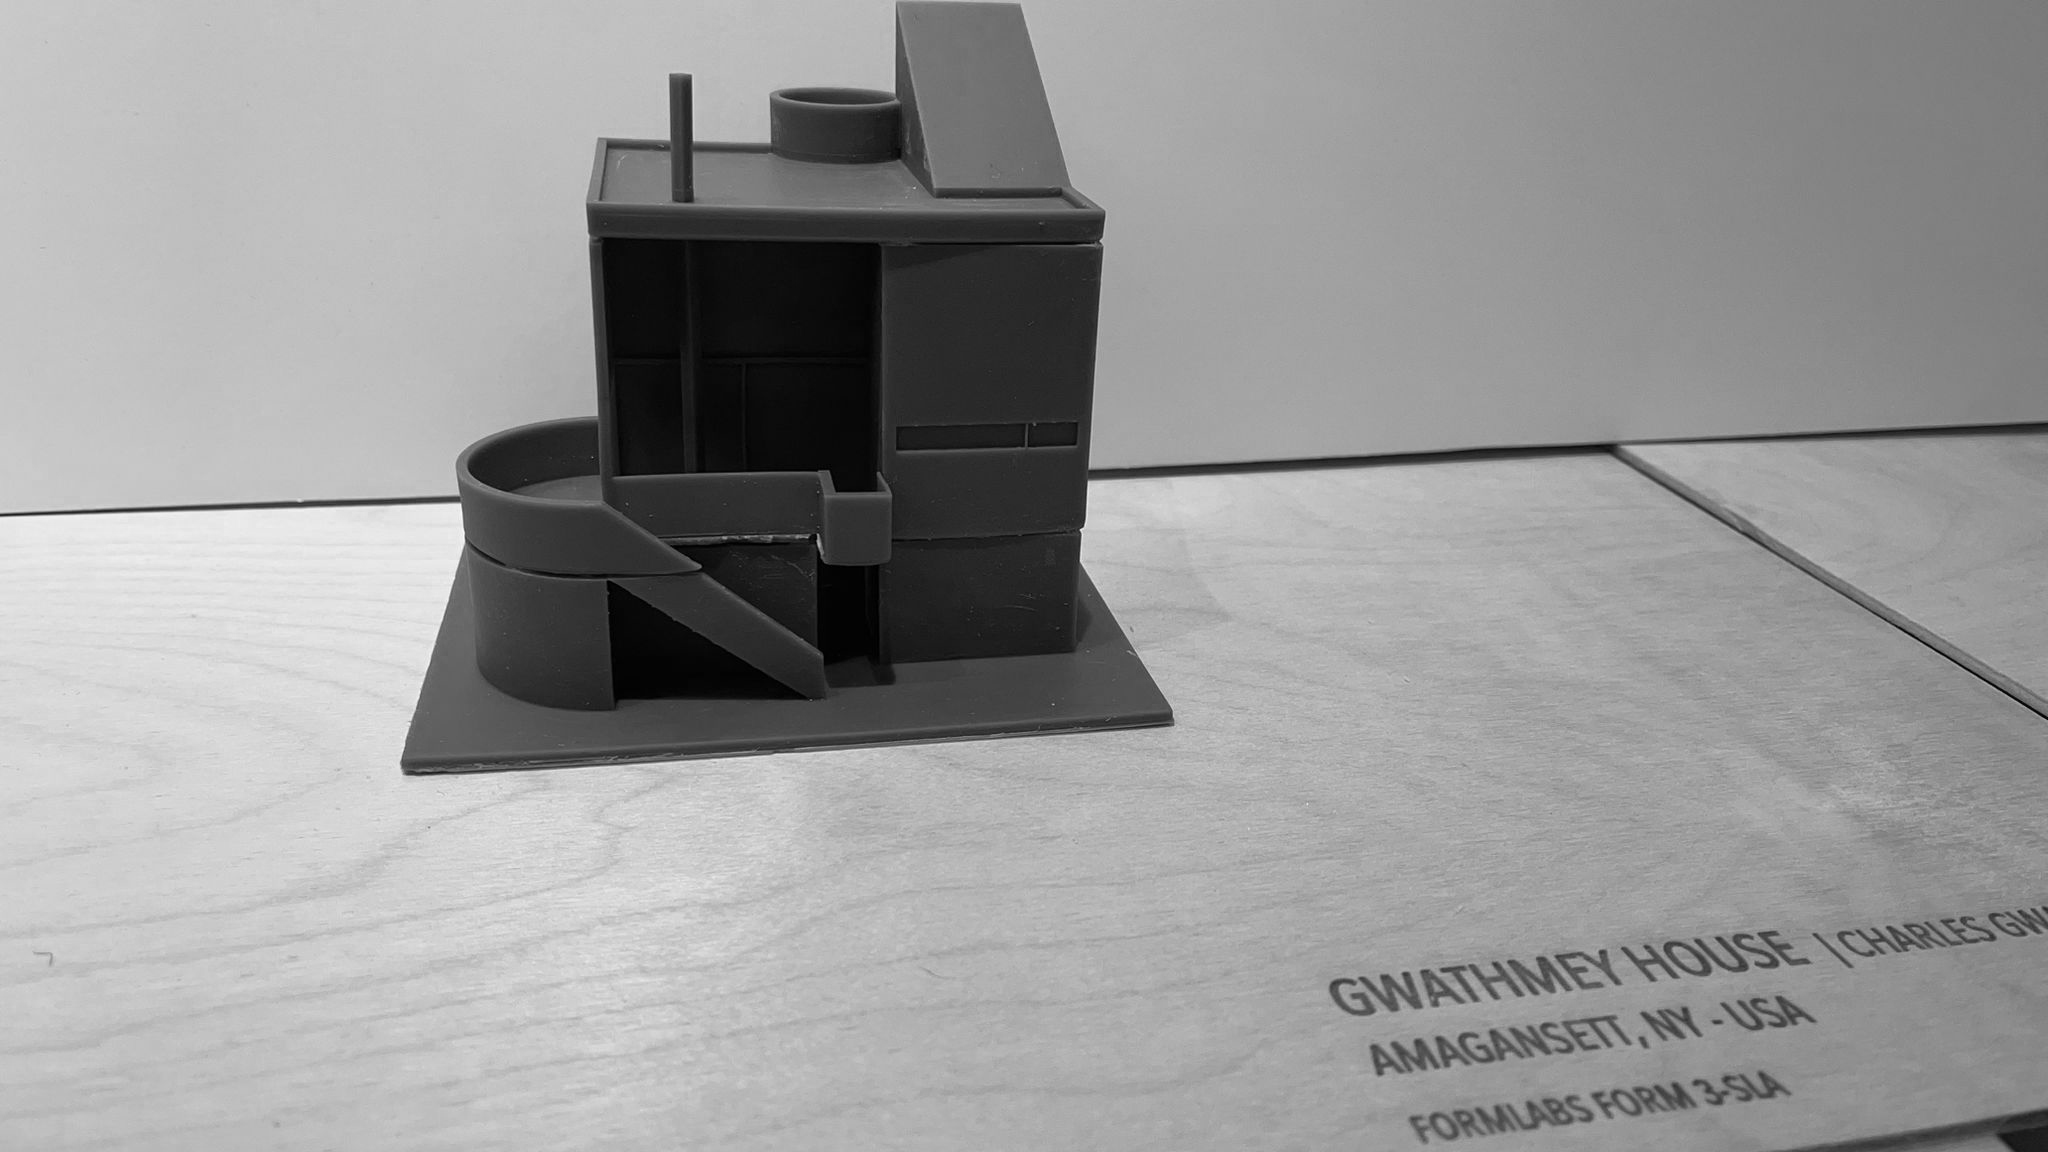 A picture of a two-story modern house model